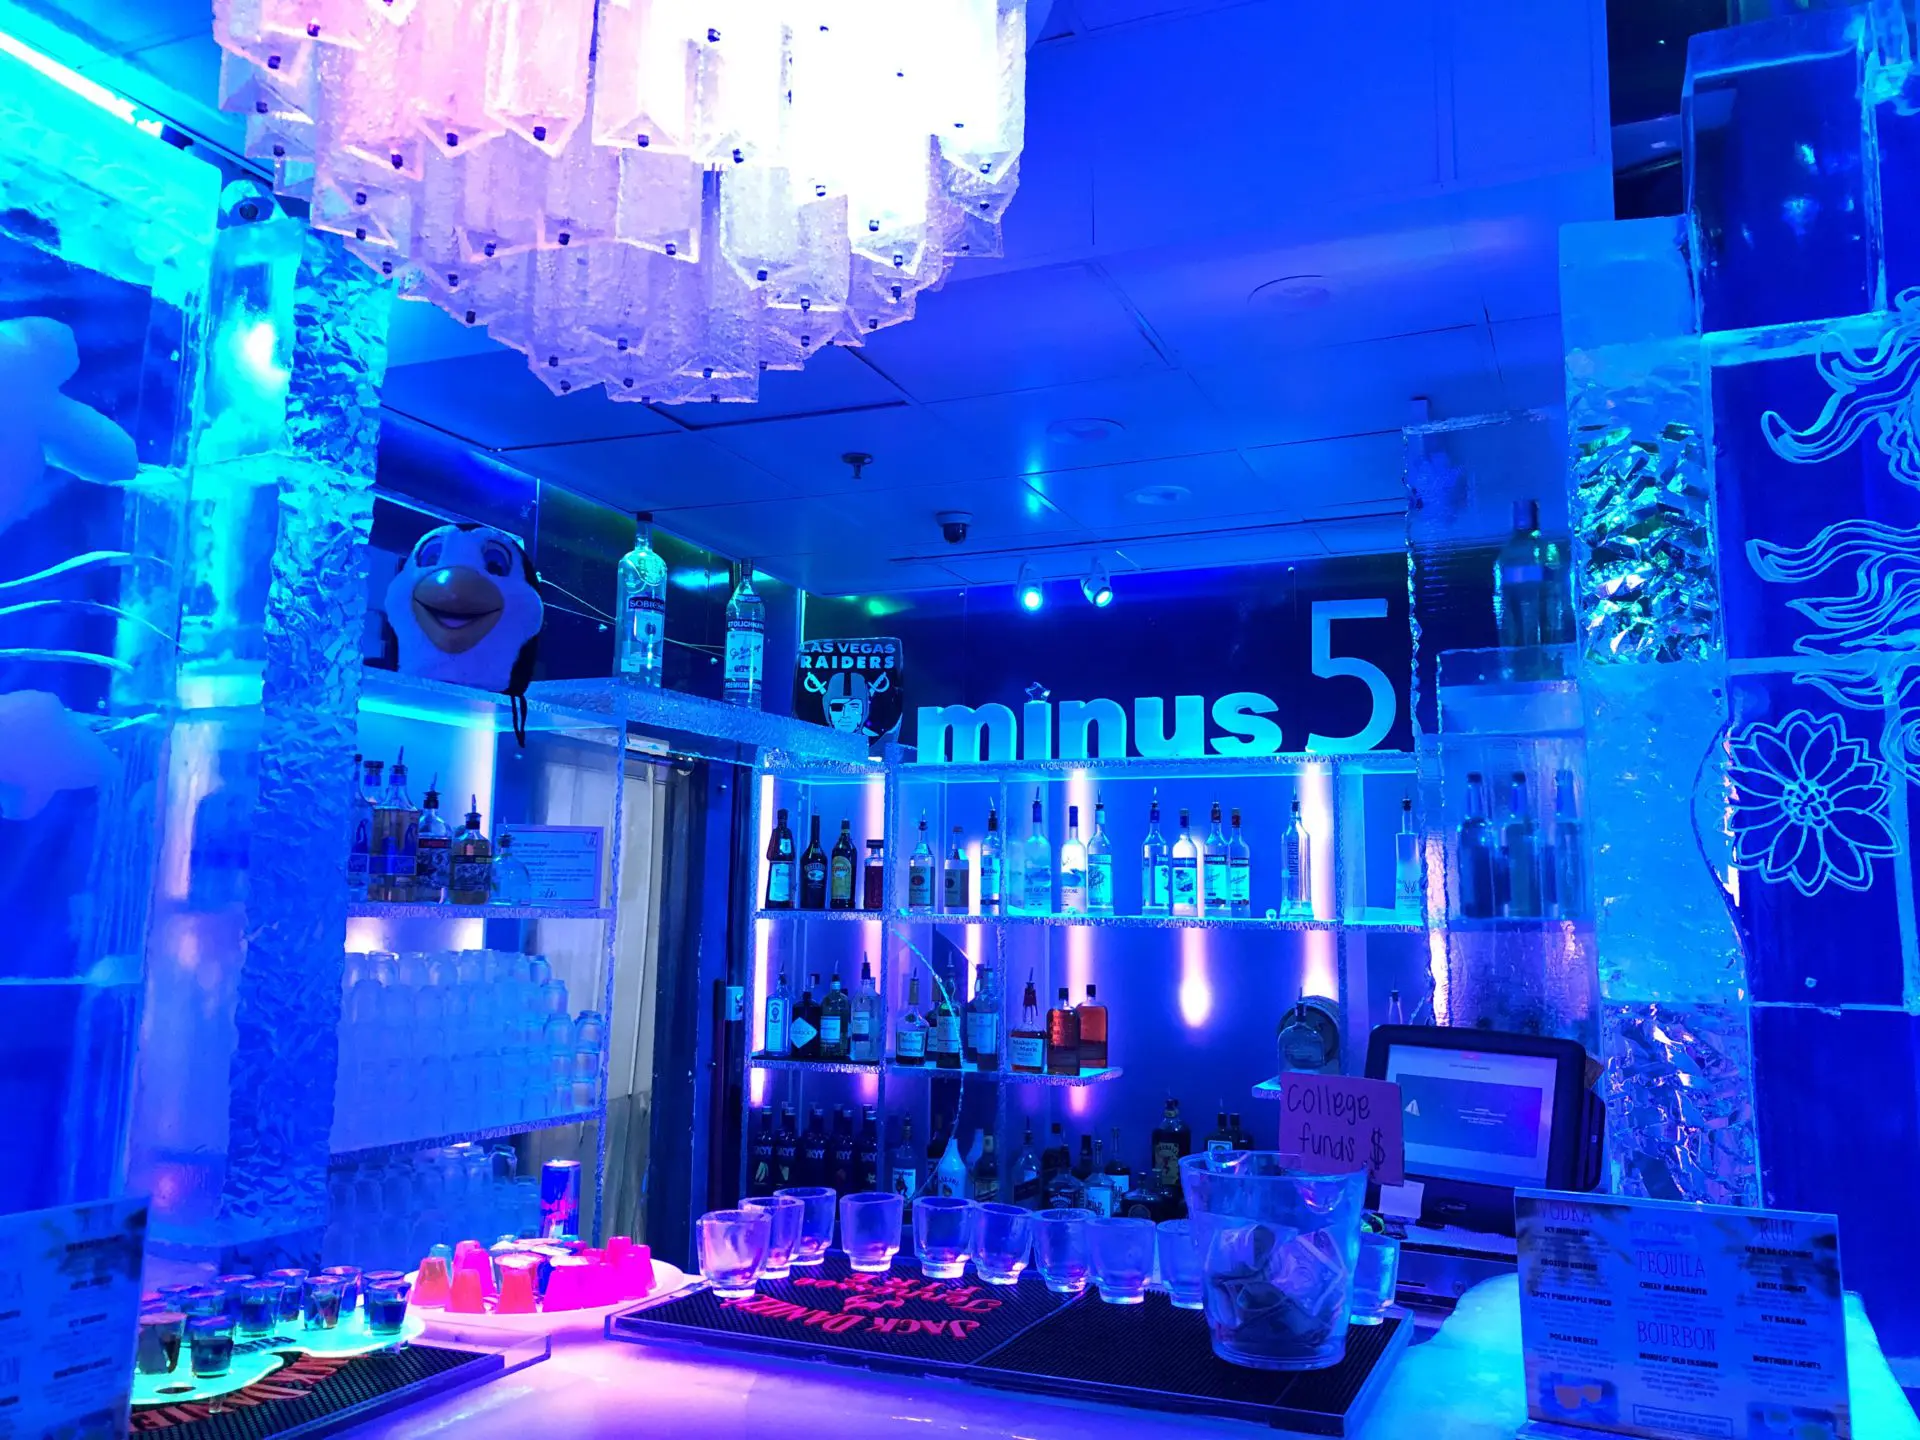 Minus 5° Ice Bars is the coolest bar in Las Vegas so it's the best to visit when you want to cool down